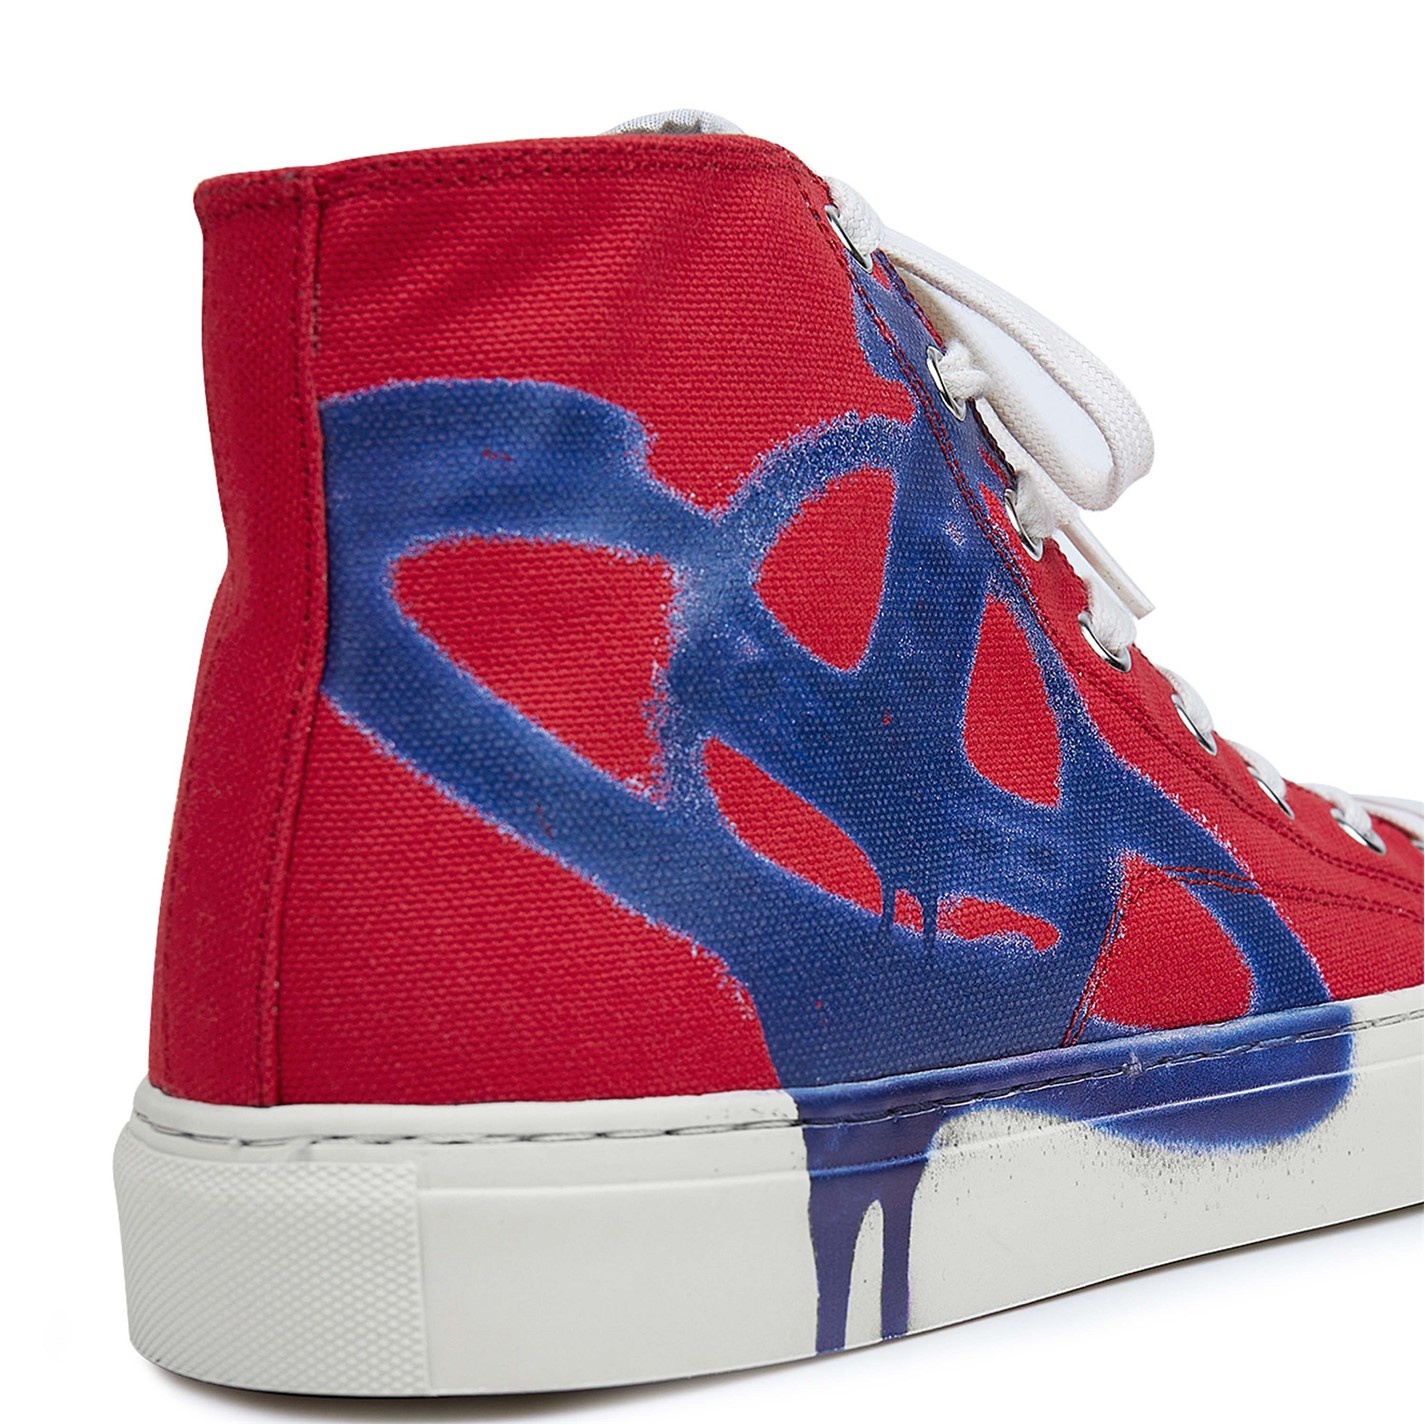 PLIMSOLL HIGH TOP TRAINERS - 7